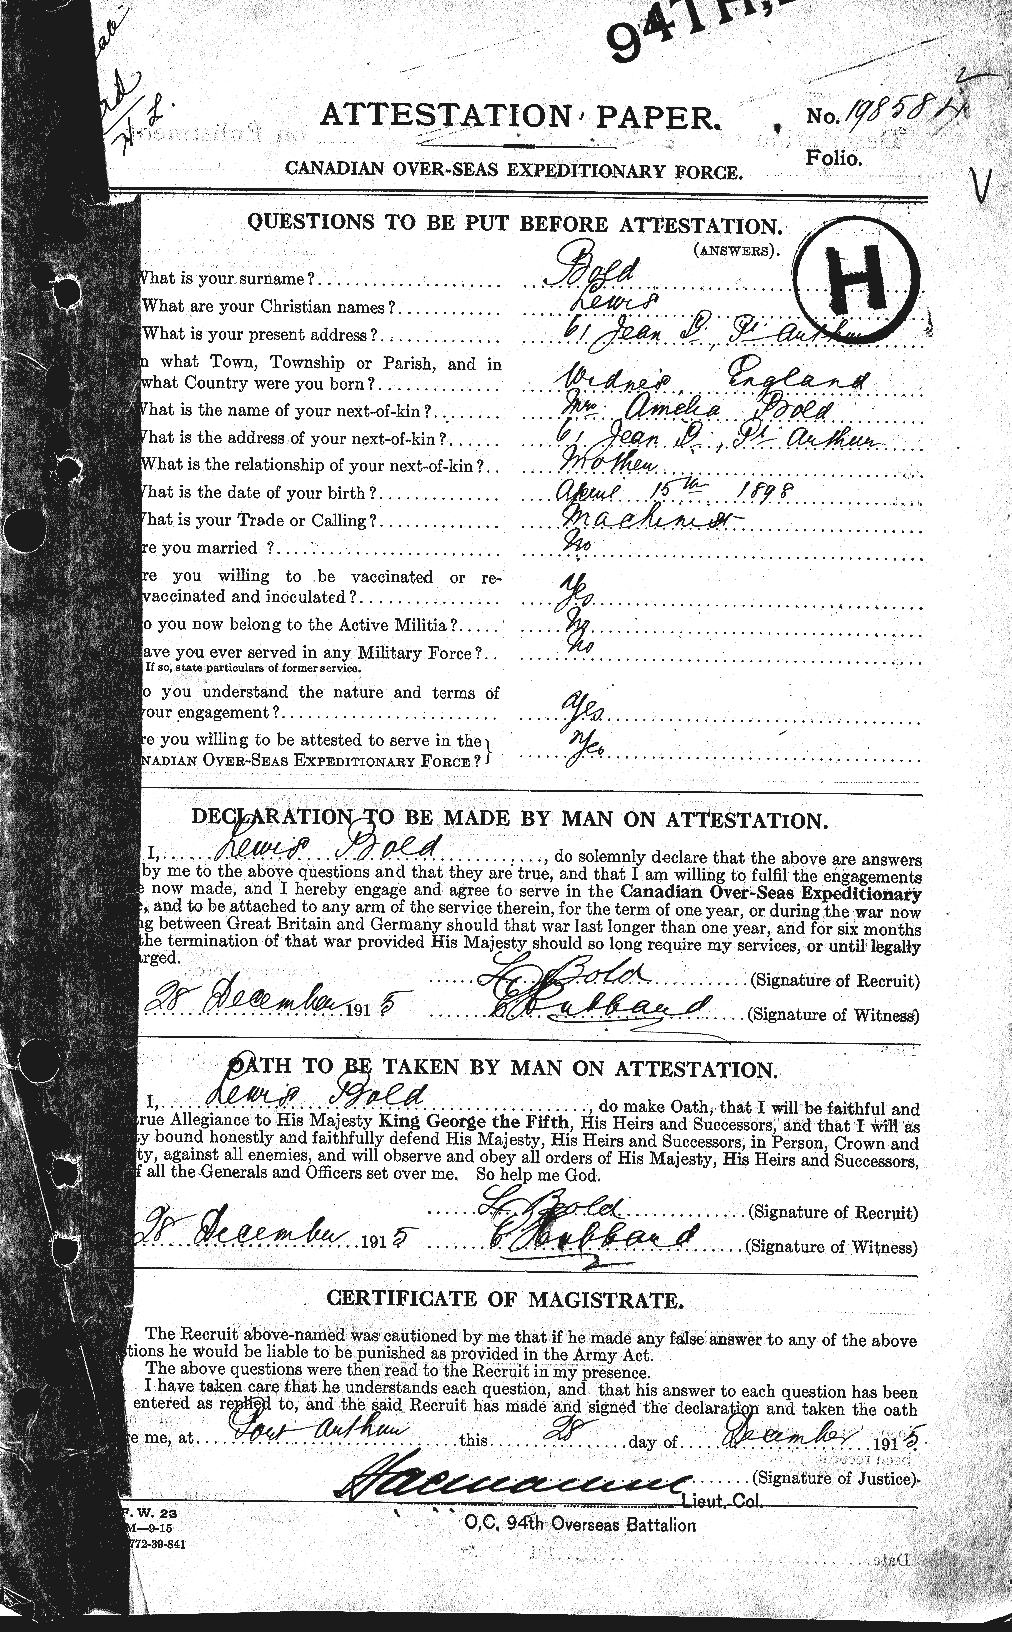 Personnel Records of the First World War - CEF 249554a